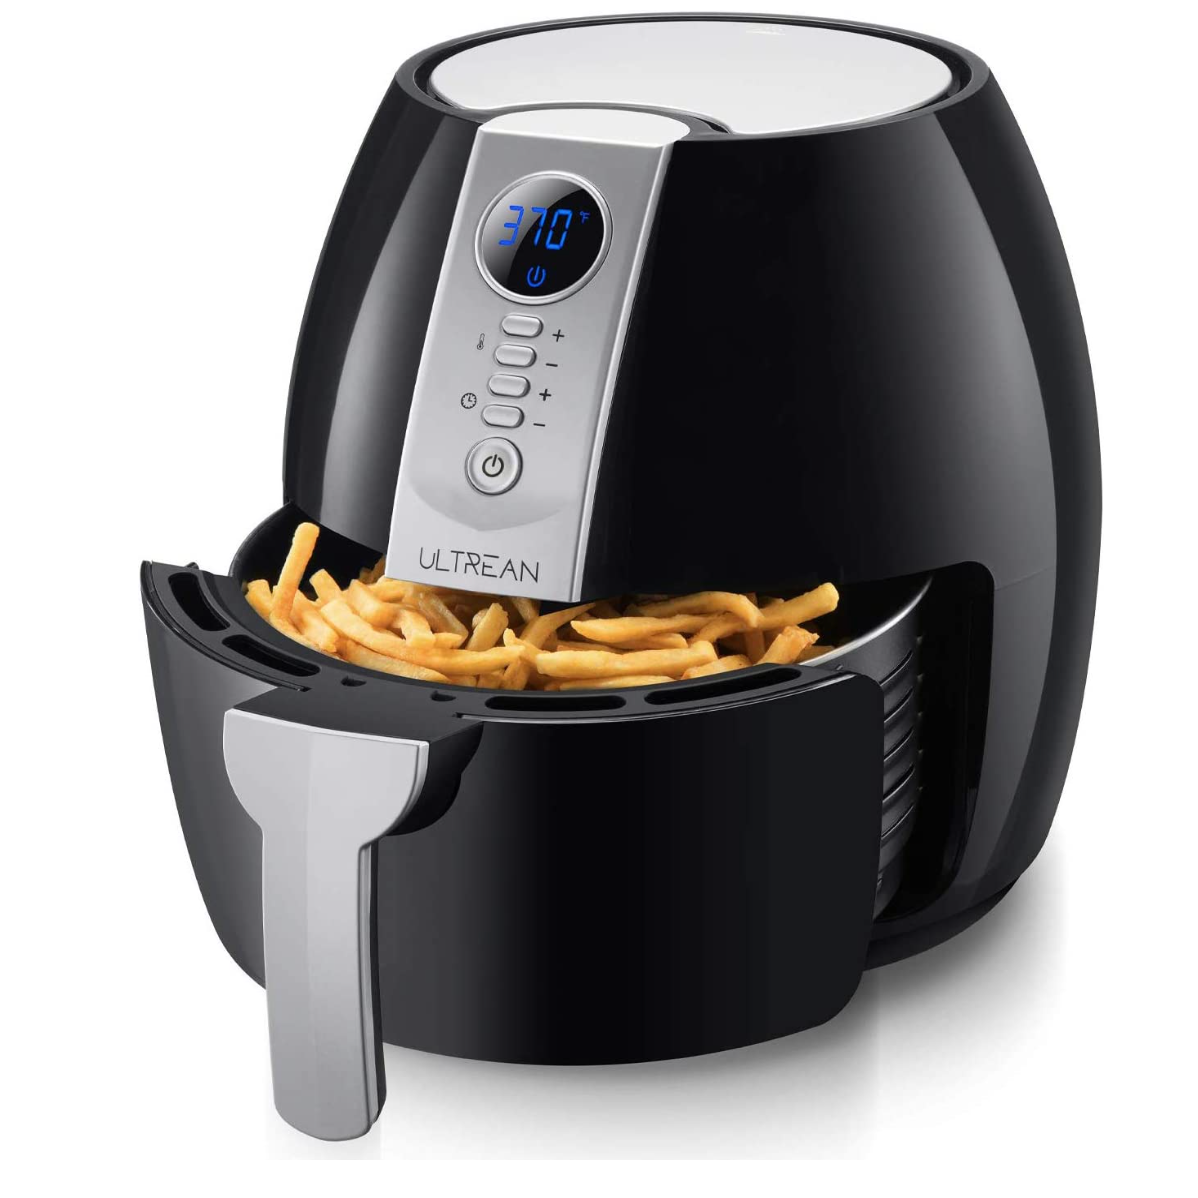 Prime Day Dash air fryer deals now live from $40 (Up to 35% off)